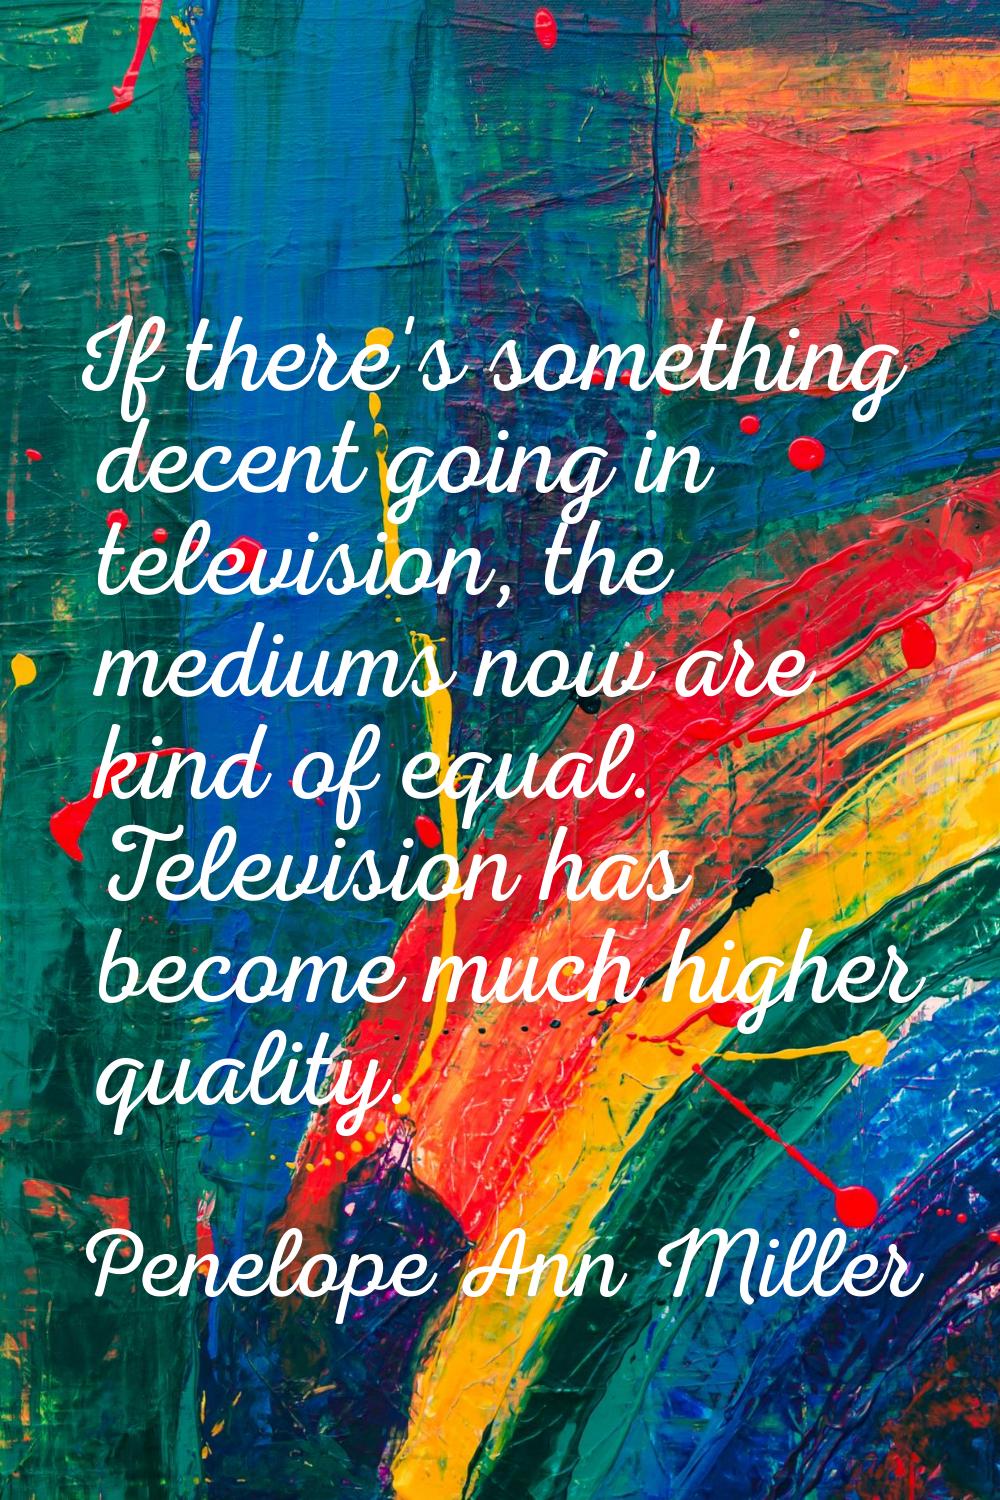 If there's something decent going in television, the mediums now are kind of equal. Television has 